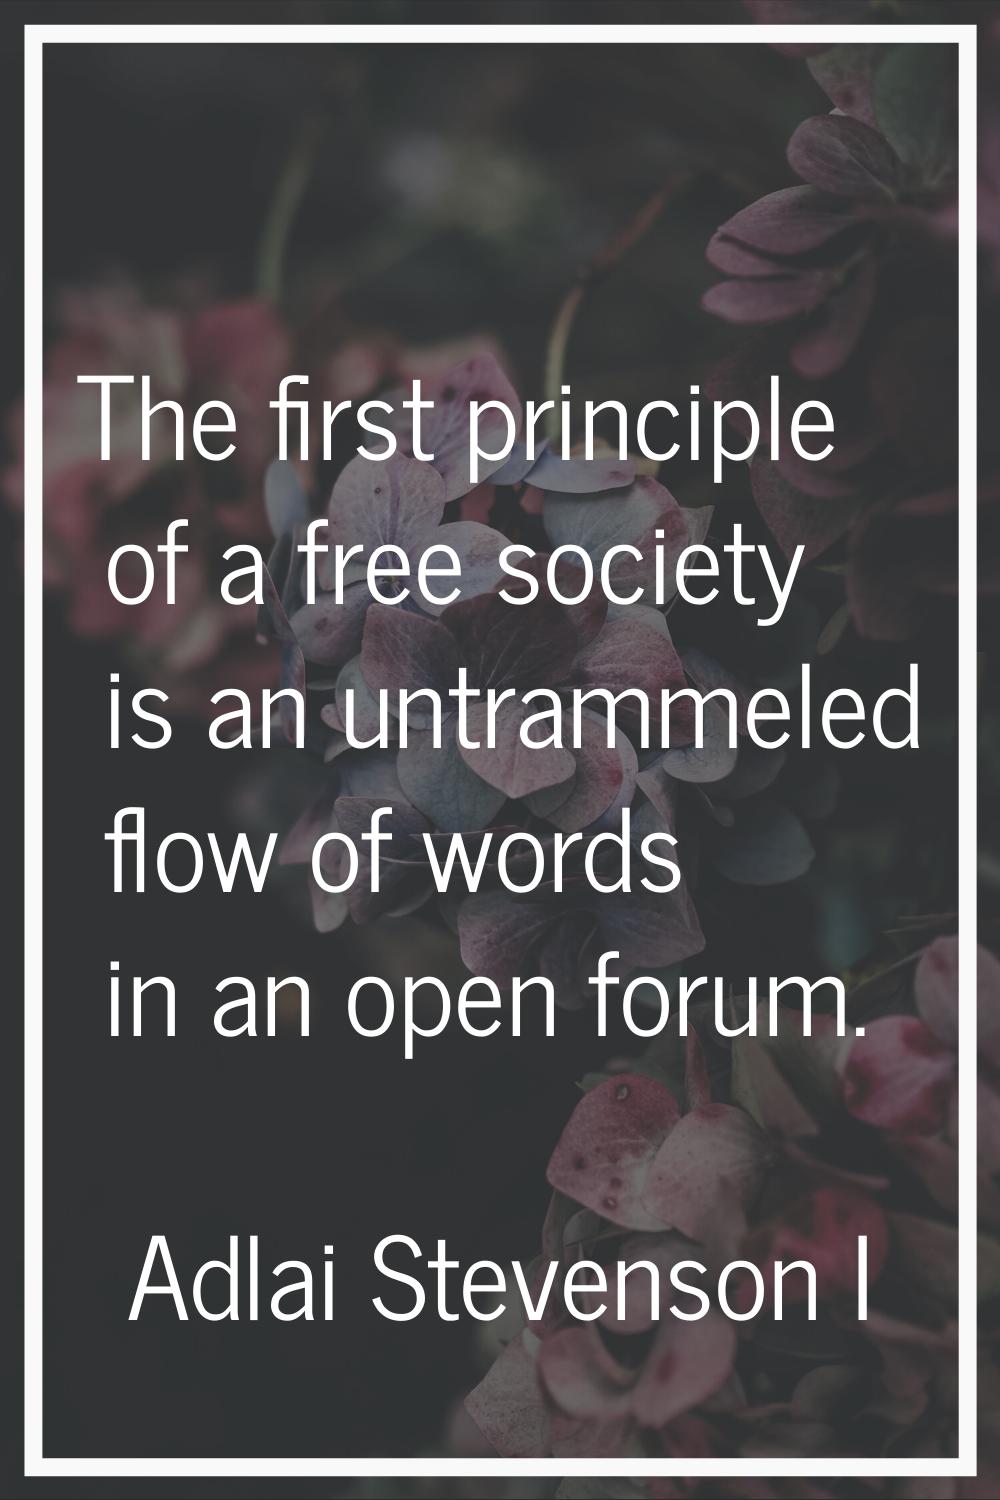 The first principle of a free society is an untrammeled flow of words in an open forum.